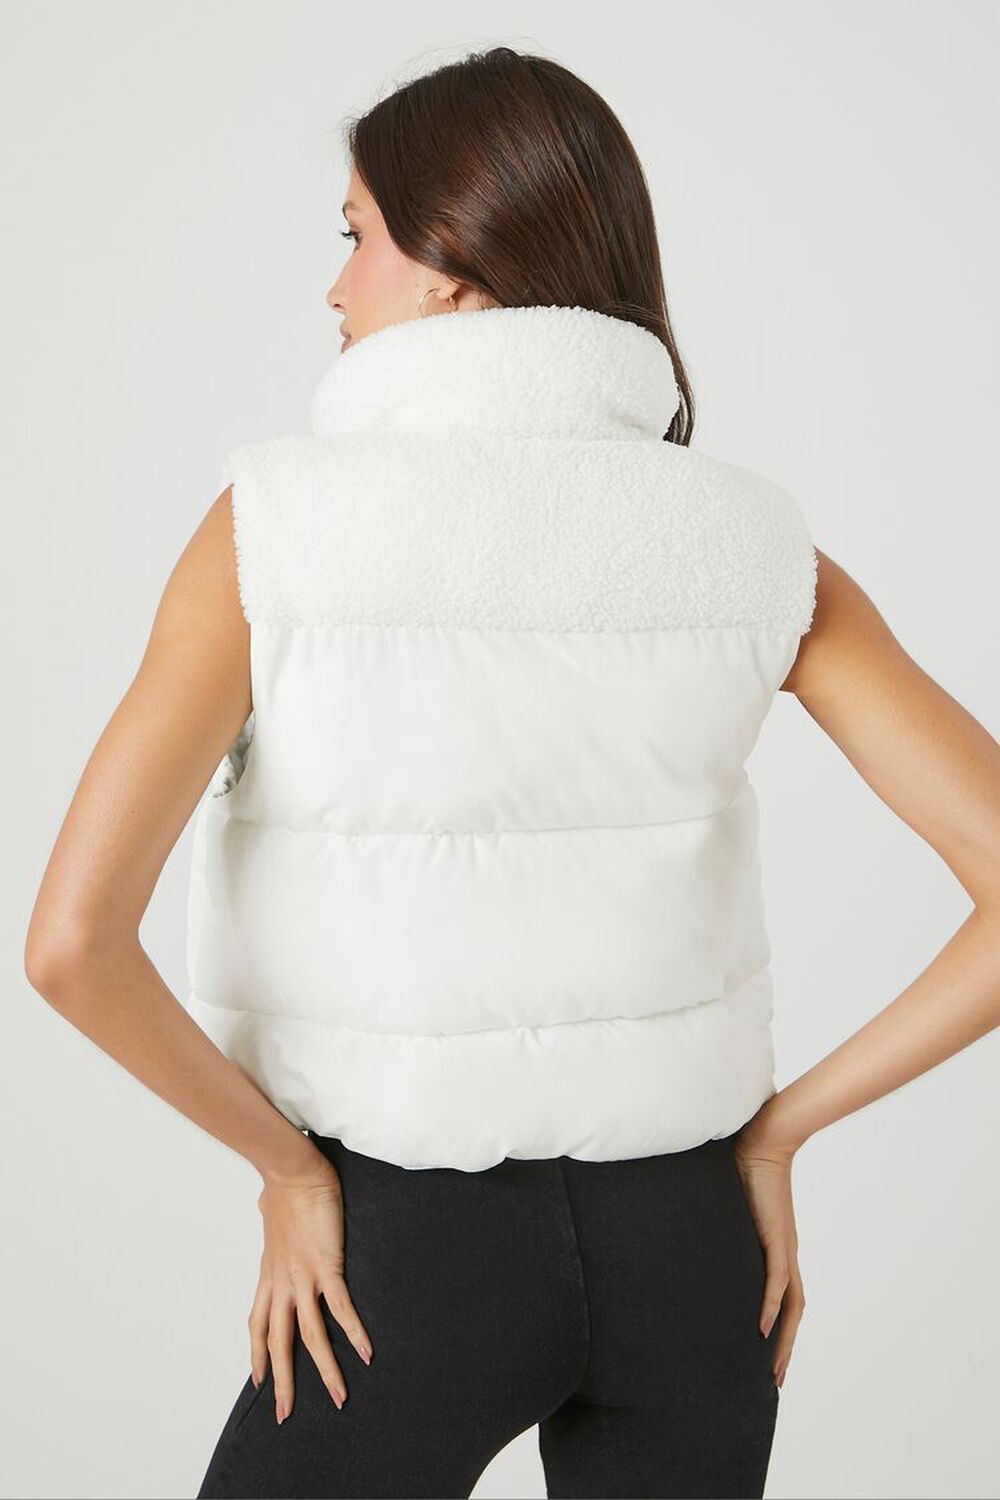 Forever 21 Women's Cropped Puffer Vest